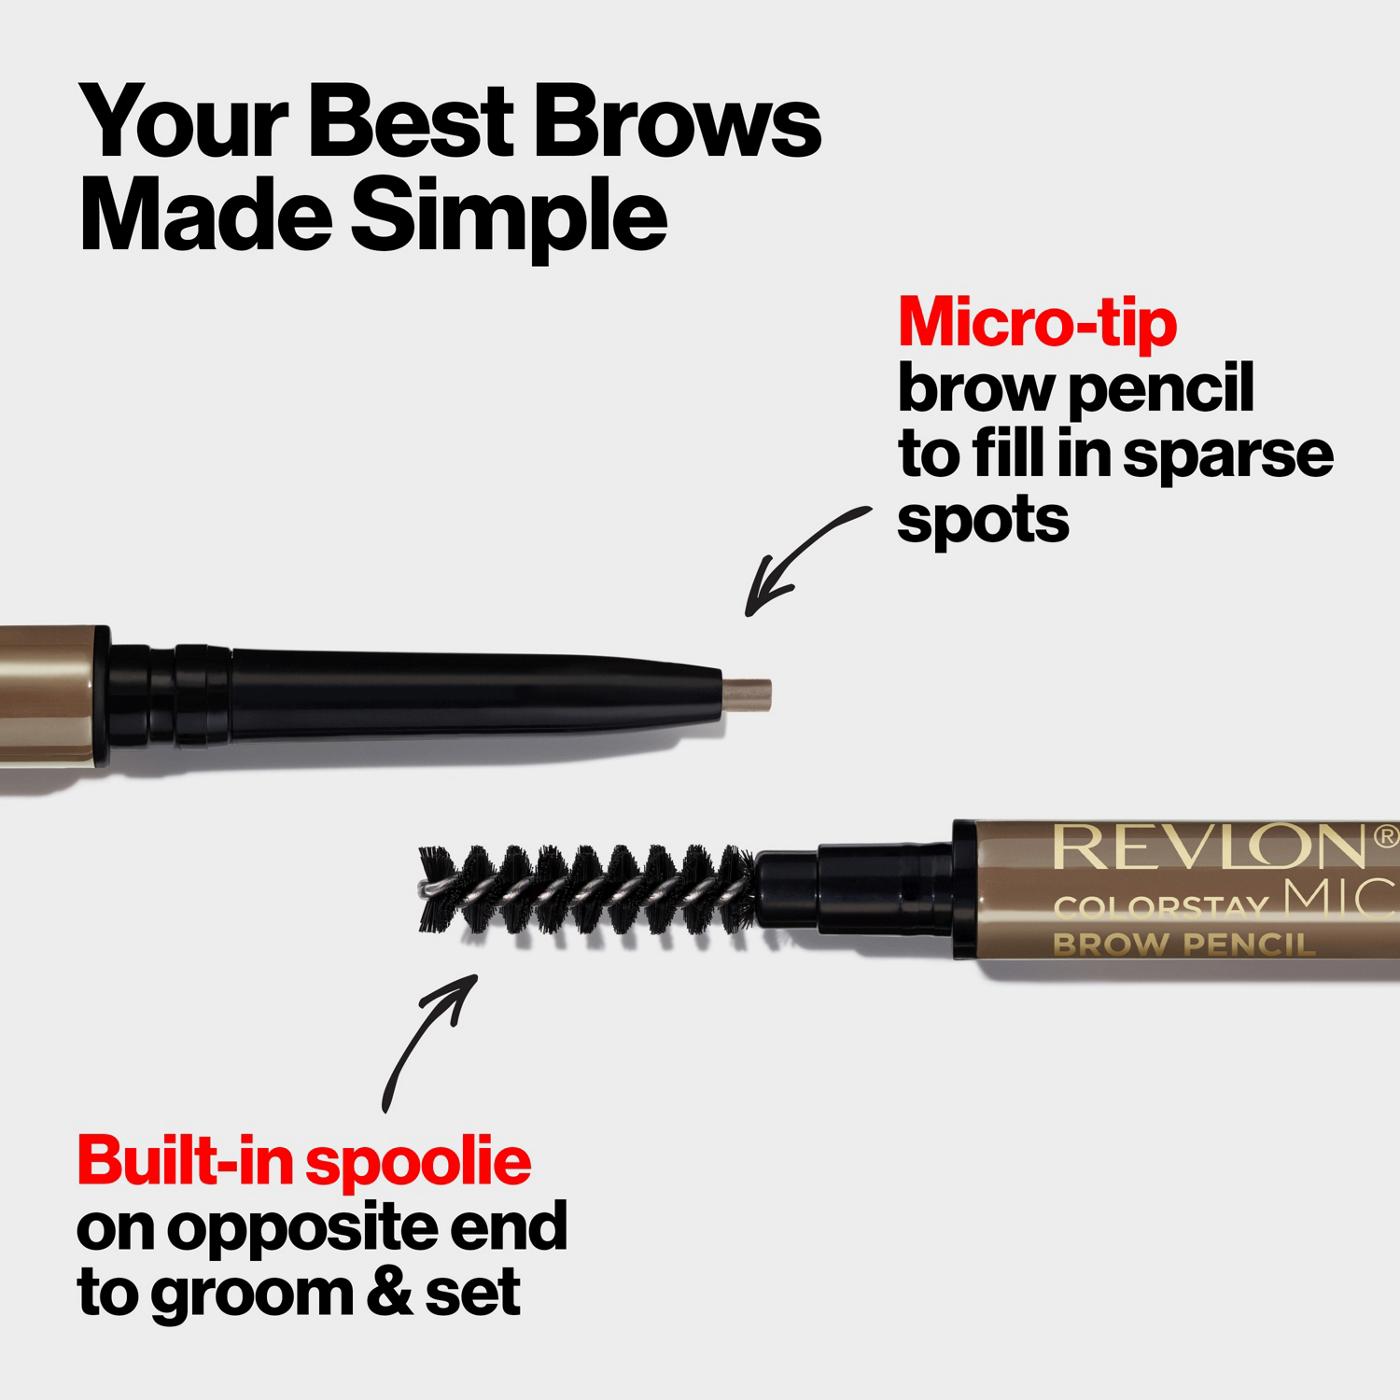 Revlon ColorStay Micro Brow Pencil - Soft Brown; image 6 of 12